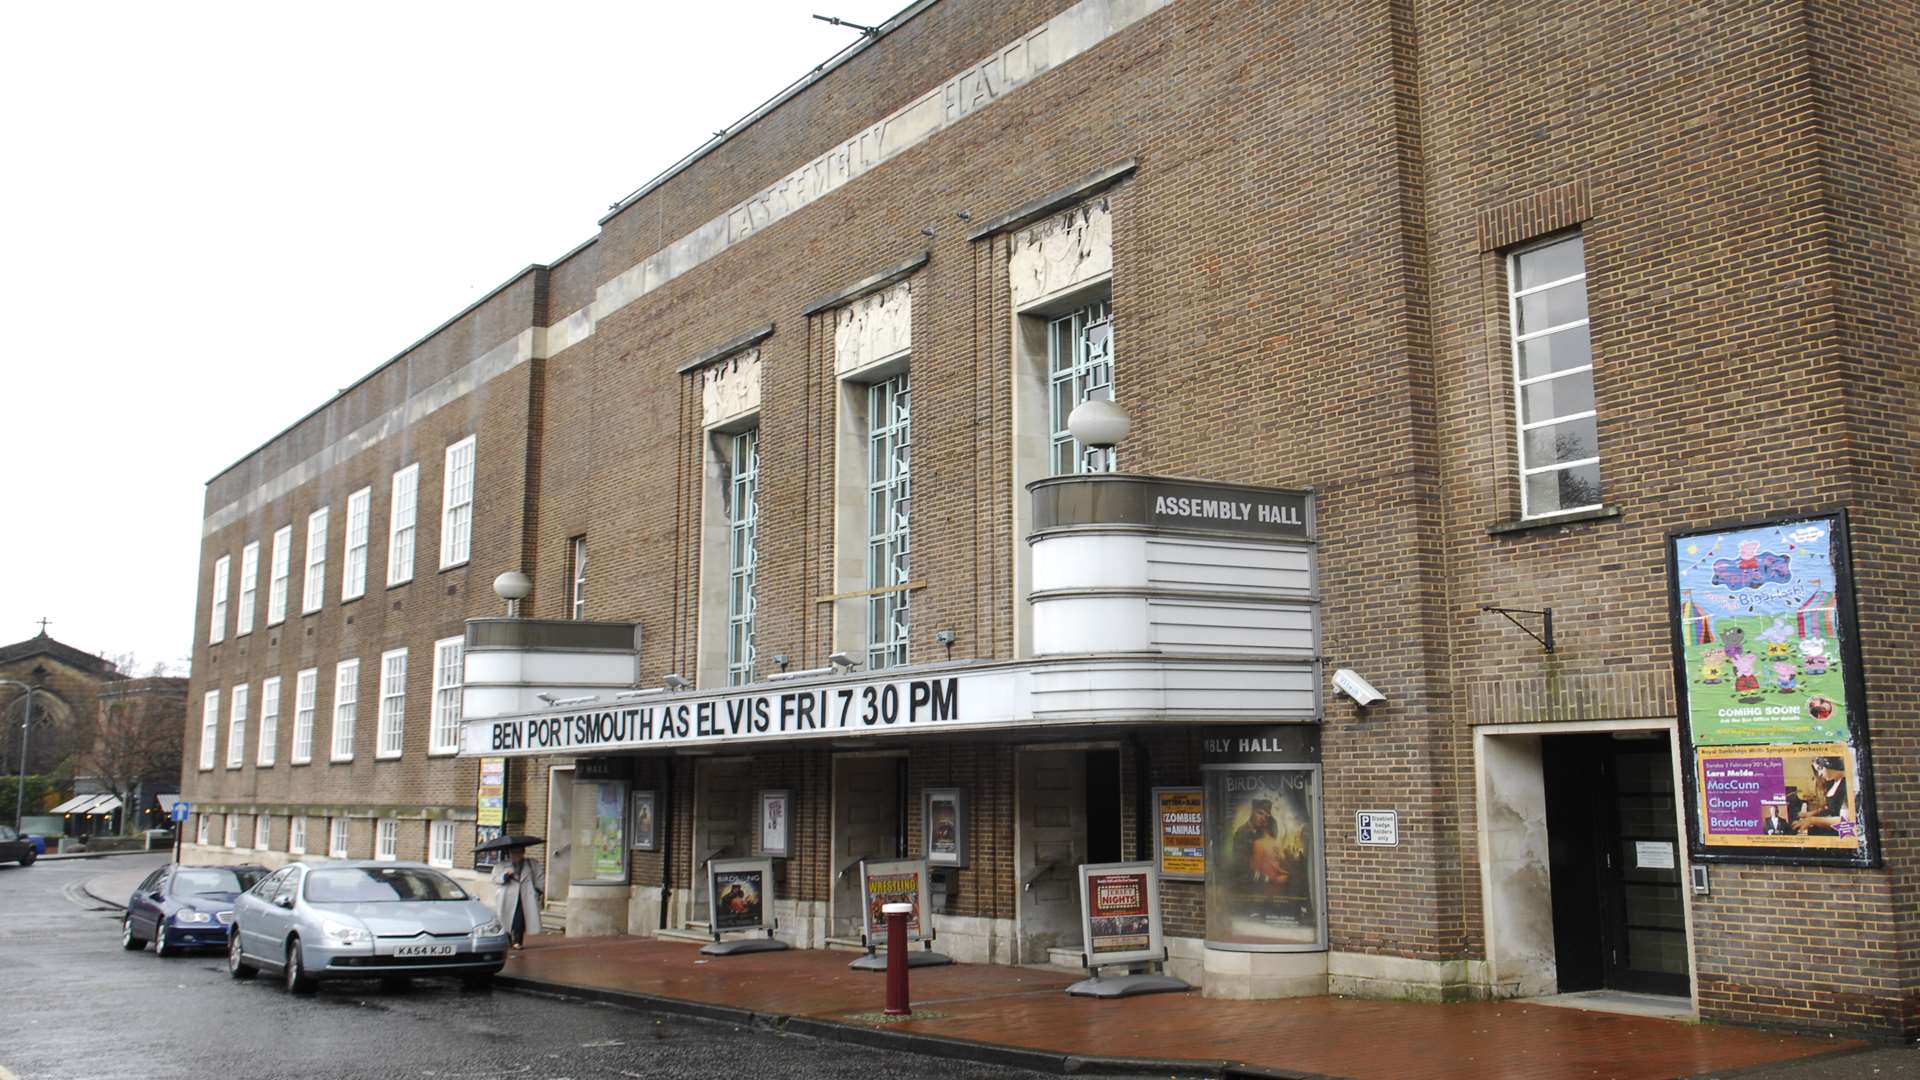 The Assembly Hall Theatre in Tunbridge Wells